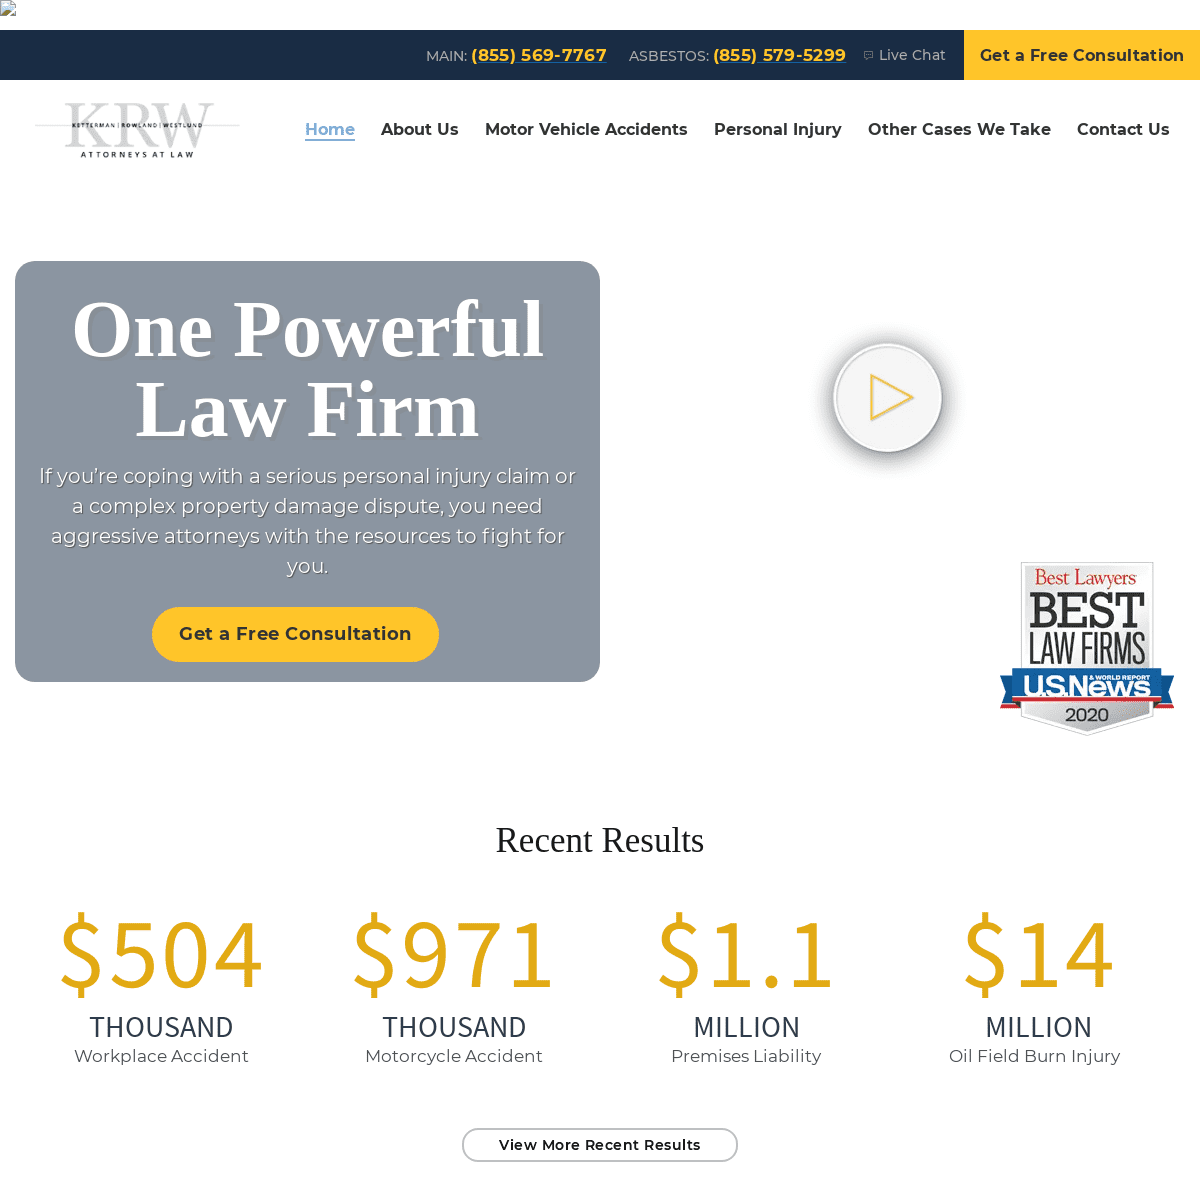 A complete backup of https://krwlawyers.com